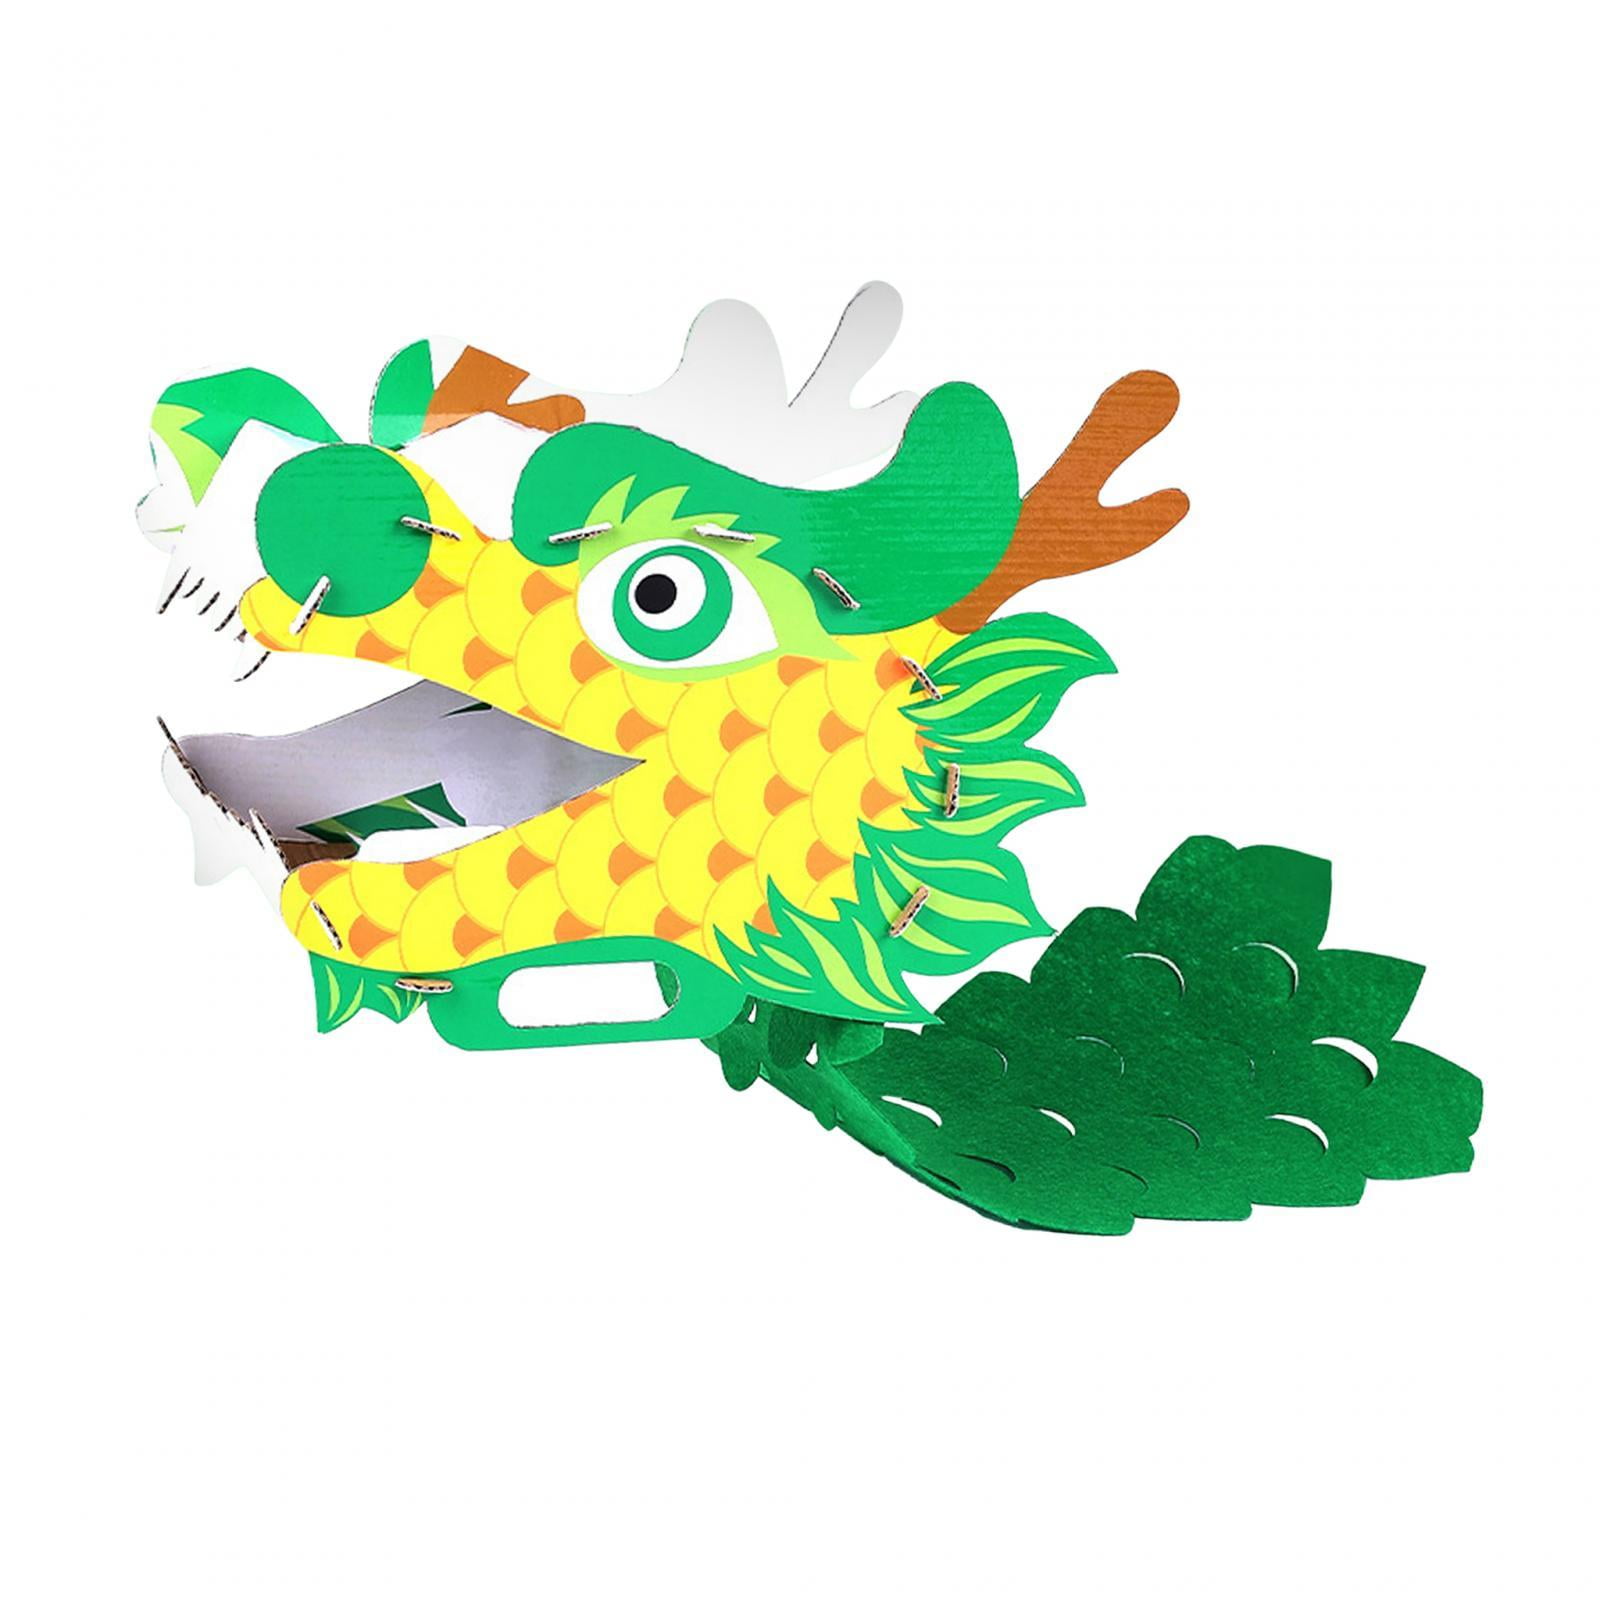 Handmade Paper Dragon Craft Material Chinese Dragon Paper Spring Festival CB